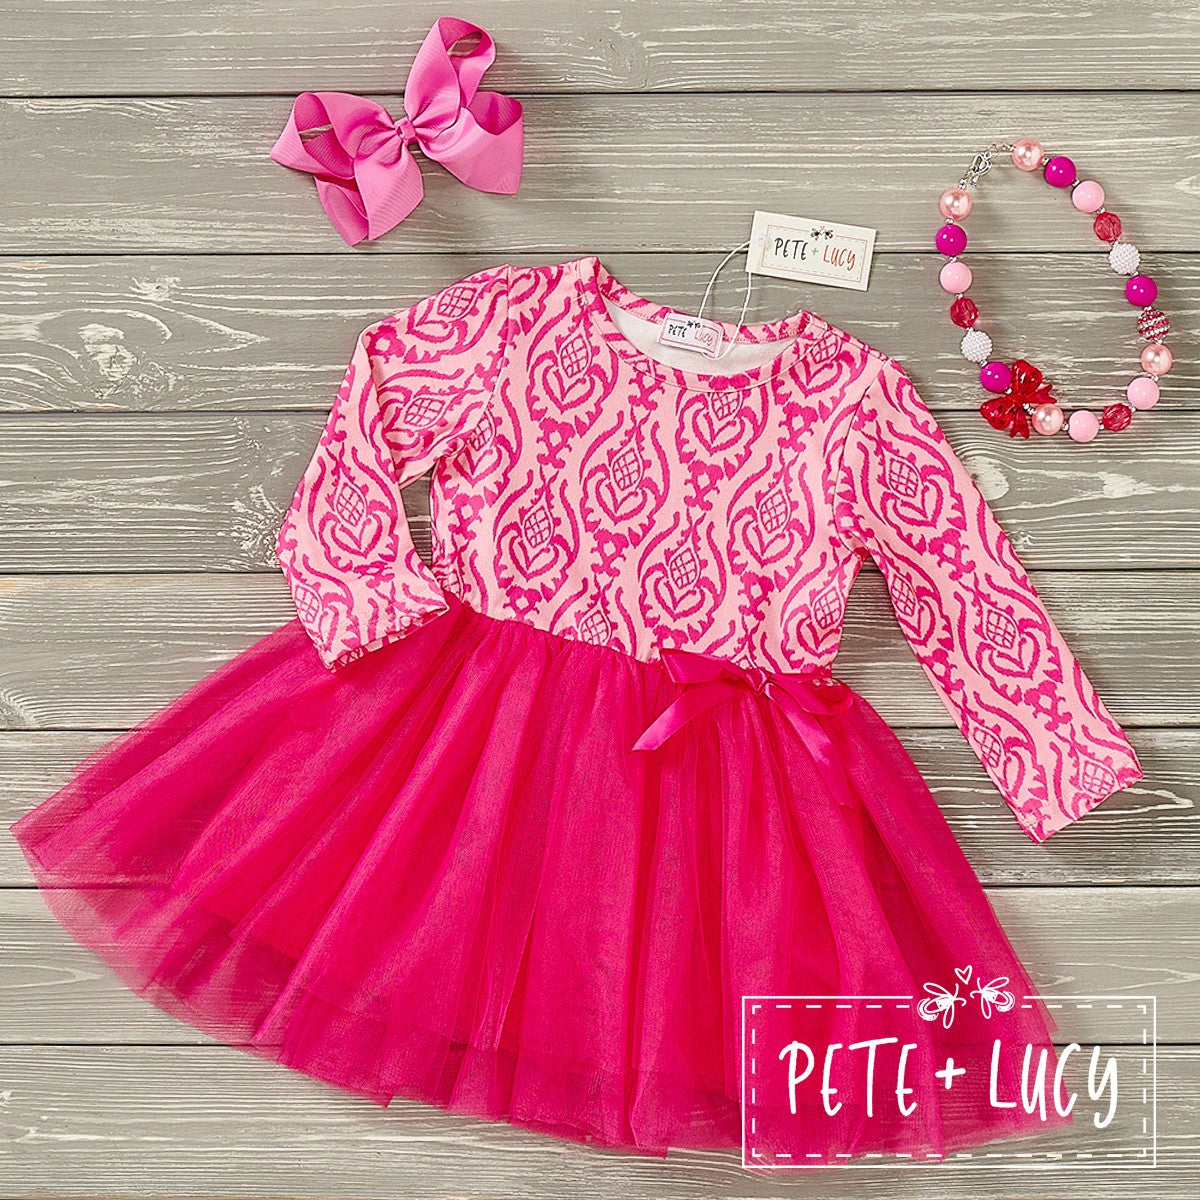 Pete + Lucy Pink Moroccan Tulle Dress Serendipity's Closet